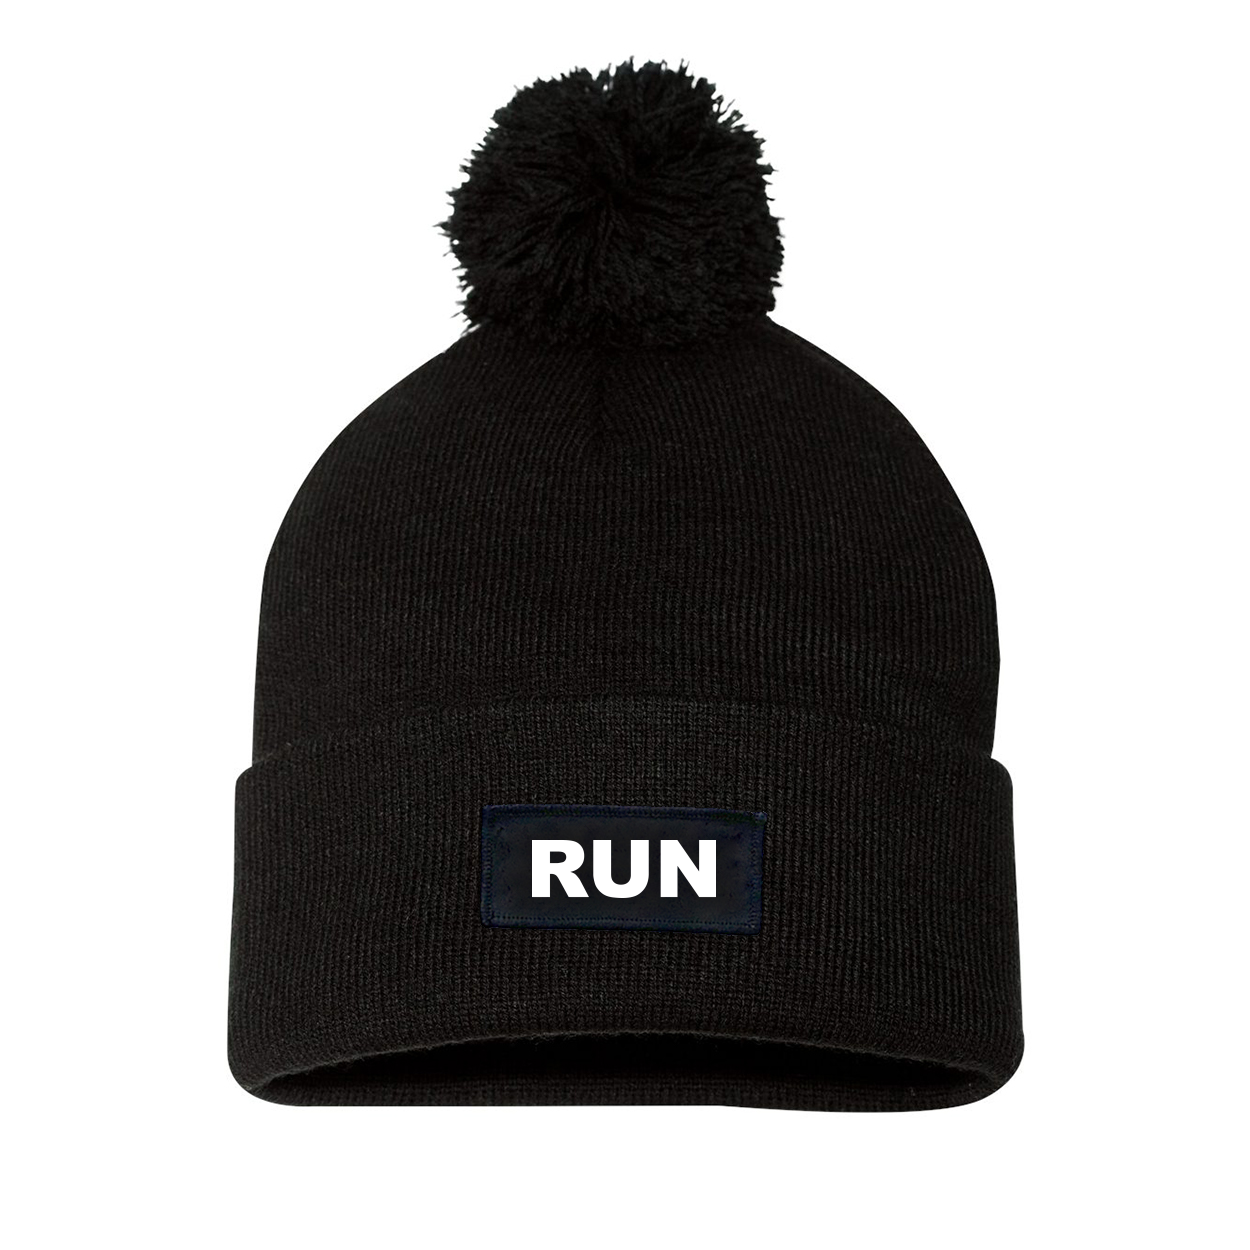 Run Brand Logo Night Out Woven Patch Roll Up Pom Knit Beanie Black